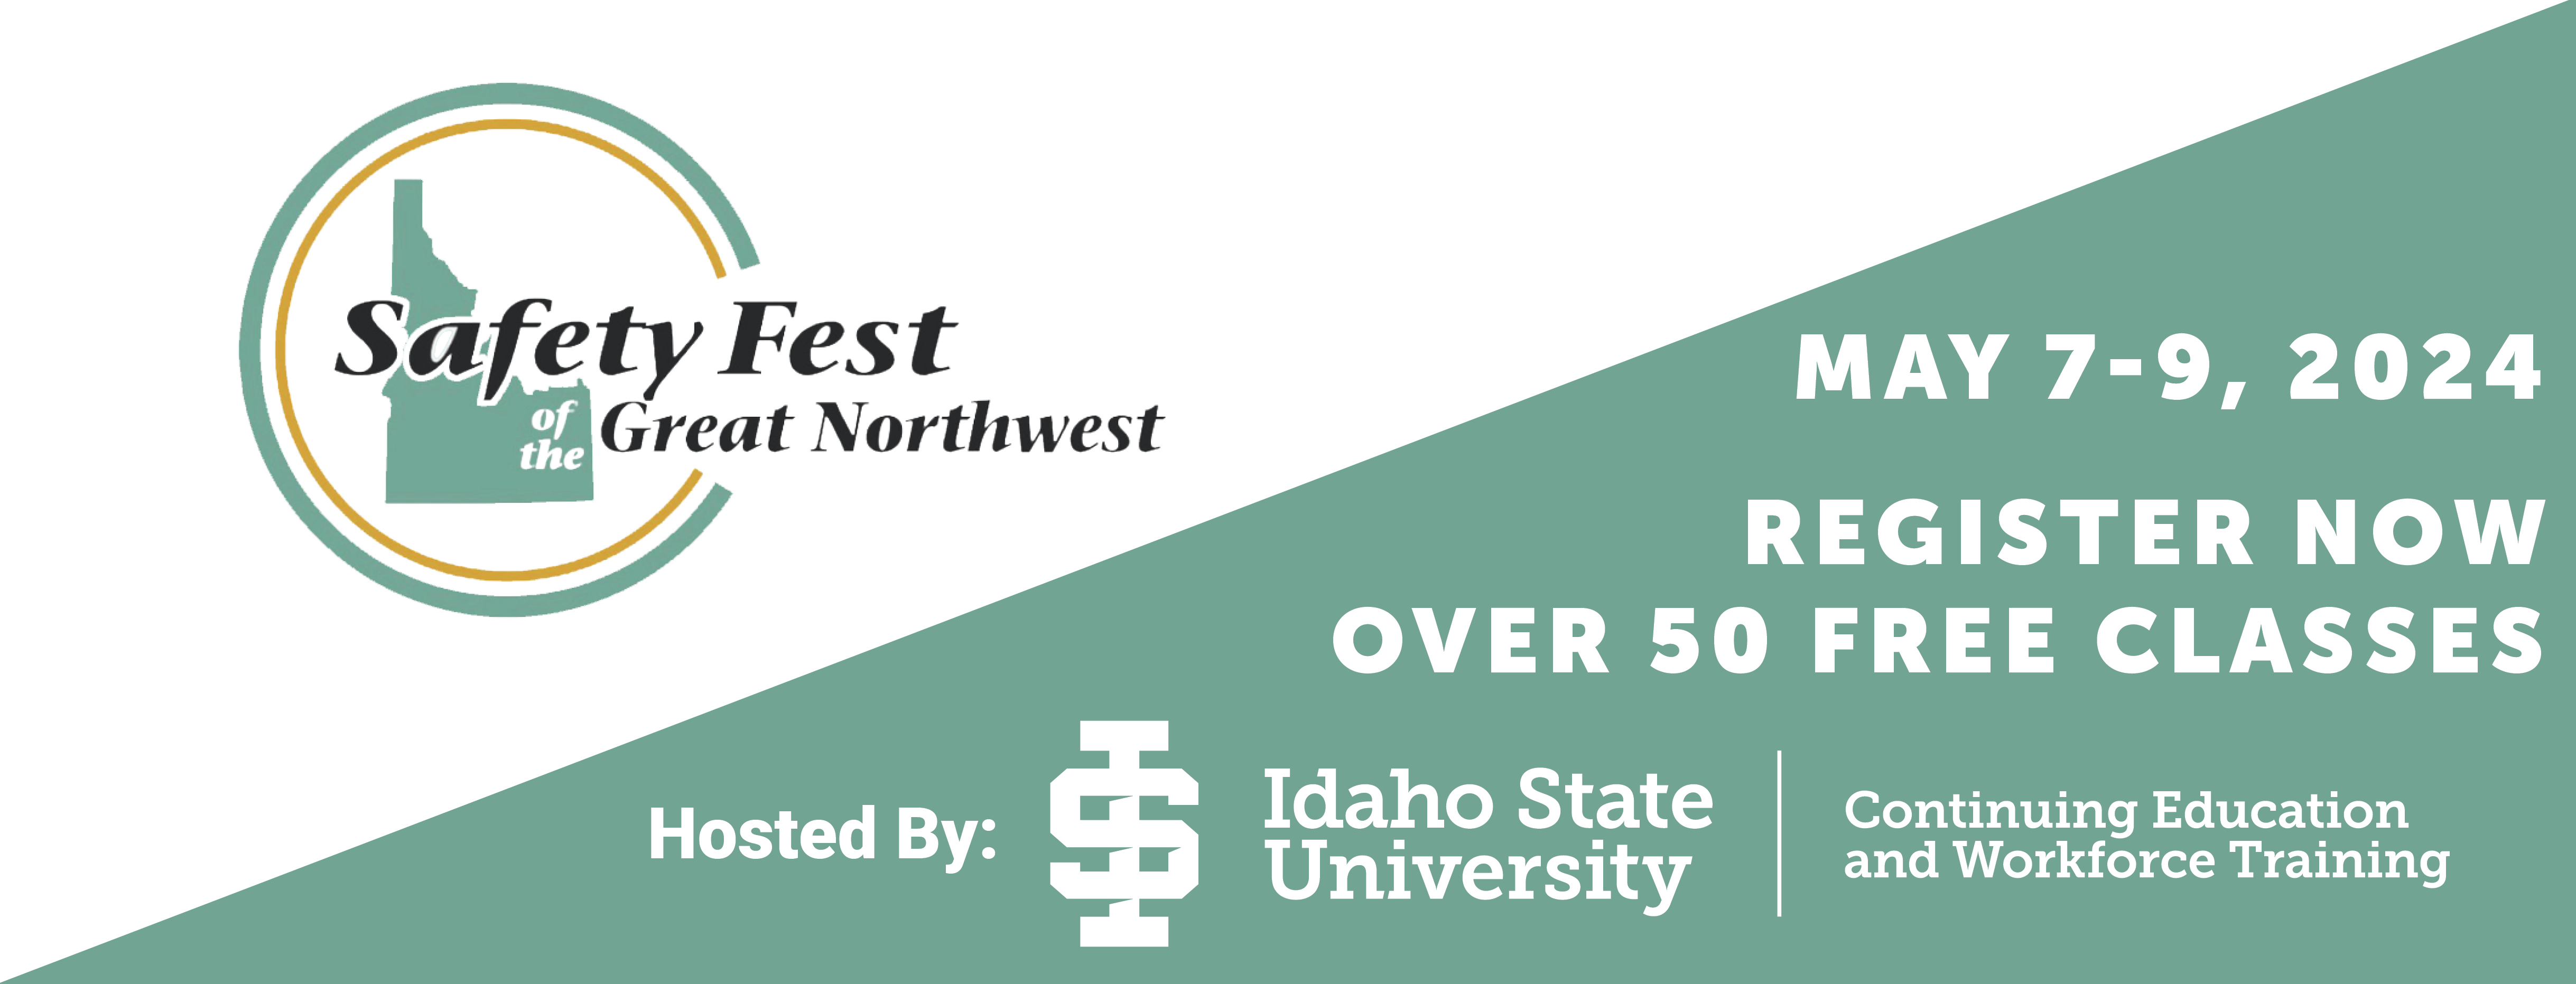 Safety Fest of Pocatello 2024 is now Open to Register